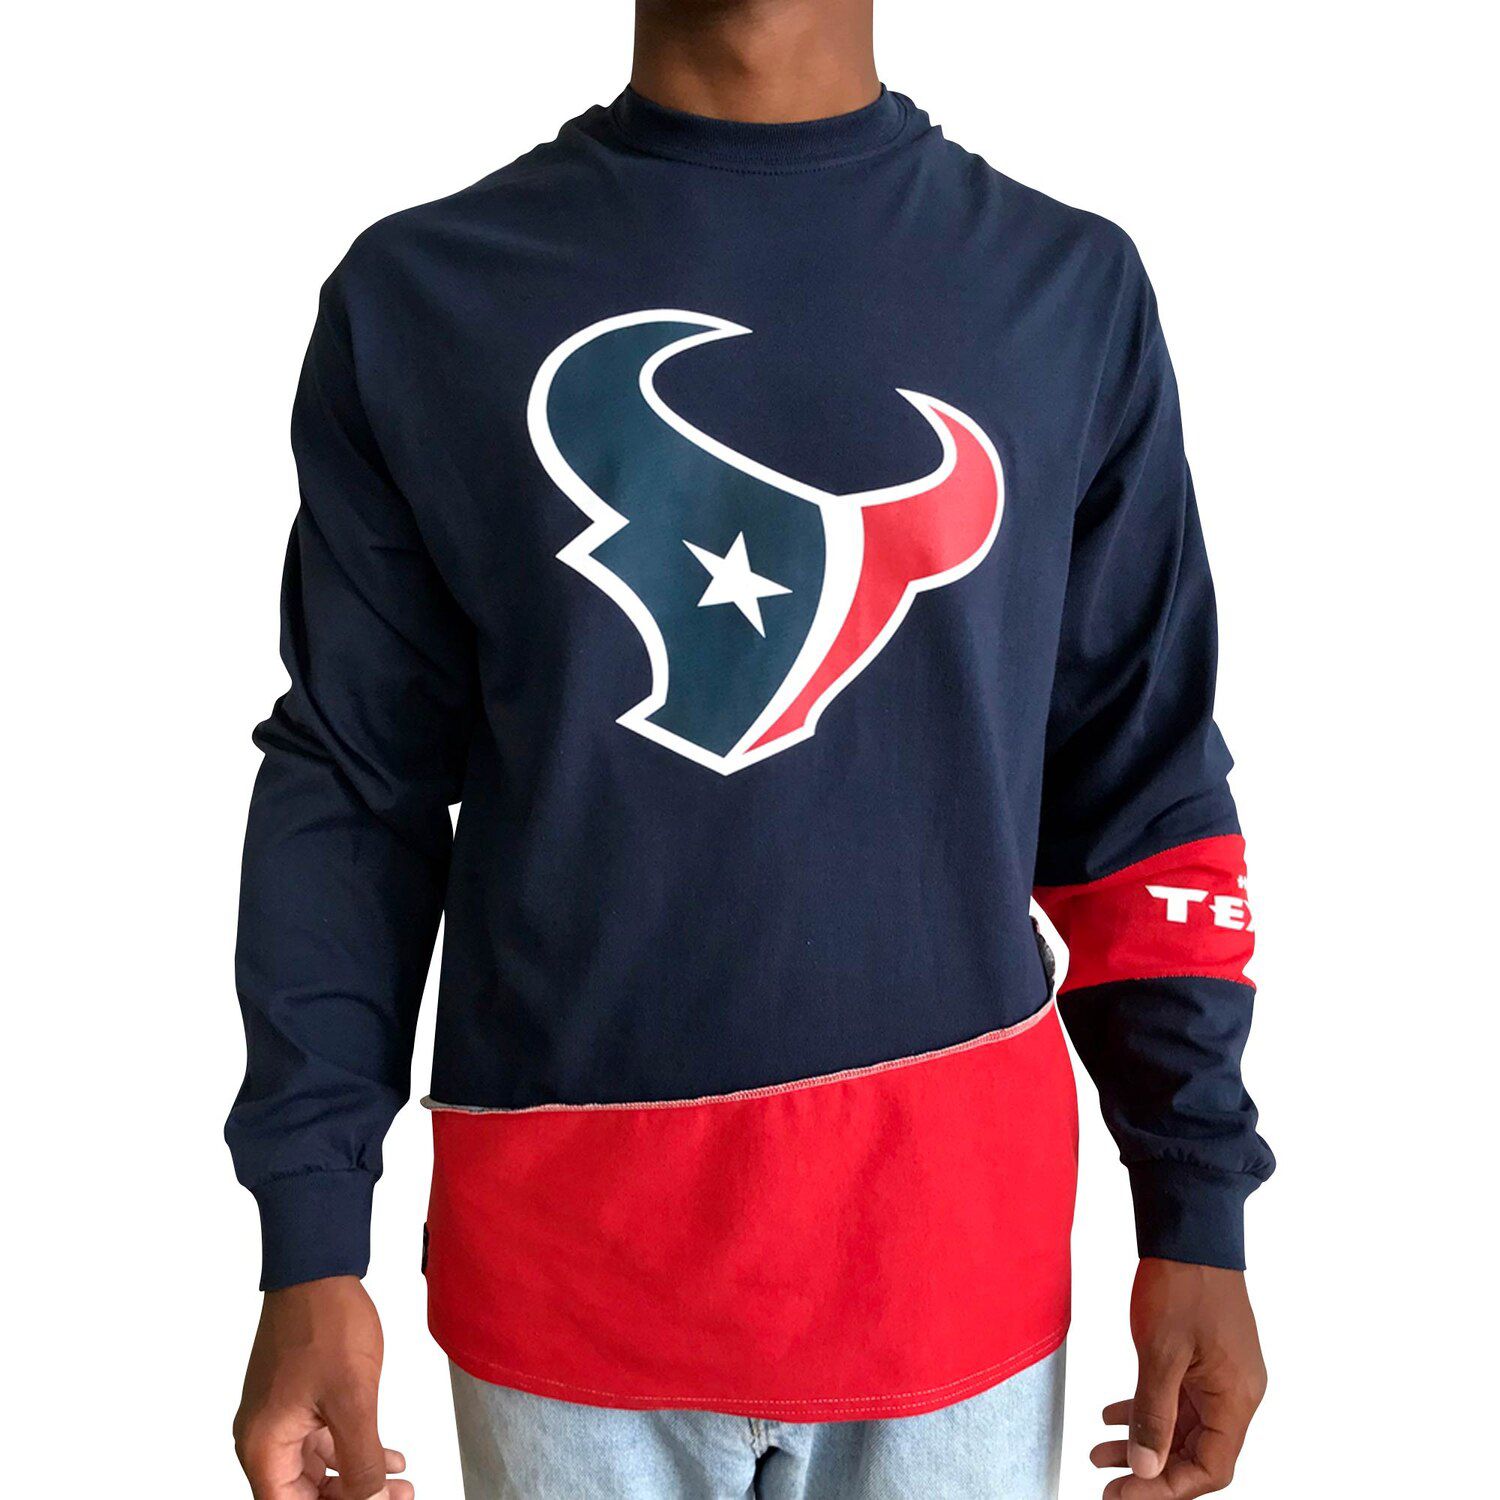 Image for Unbranded Men's Refried Apparel Navy/Red Houston Texans Sustainable Upcycled Angle Long Sleeve T-Shirt at Kohl's.